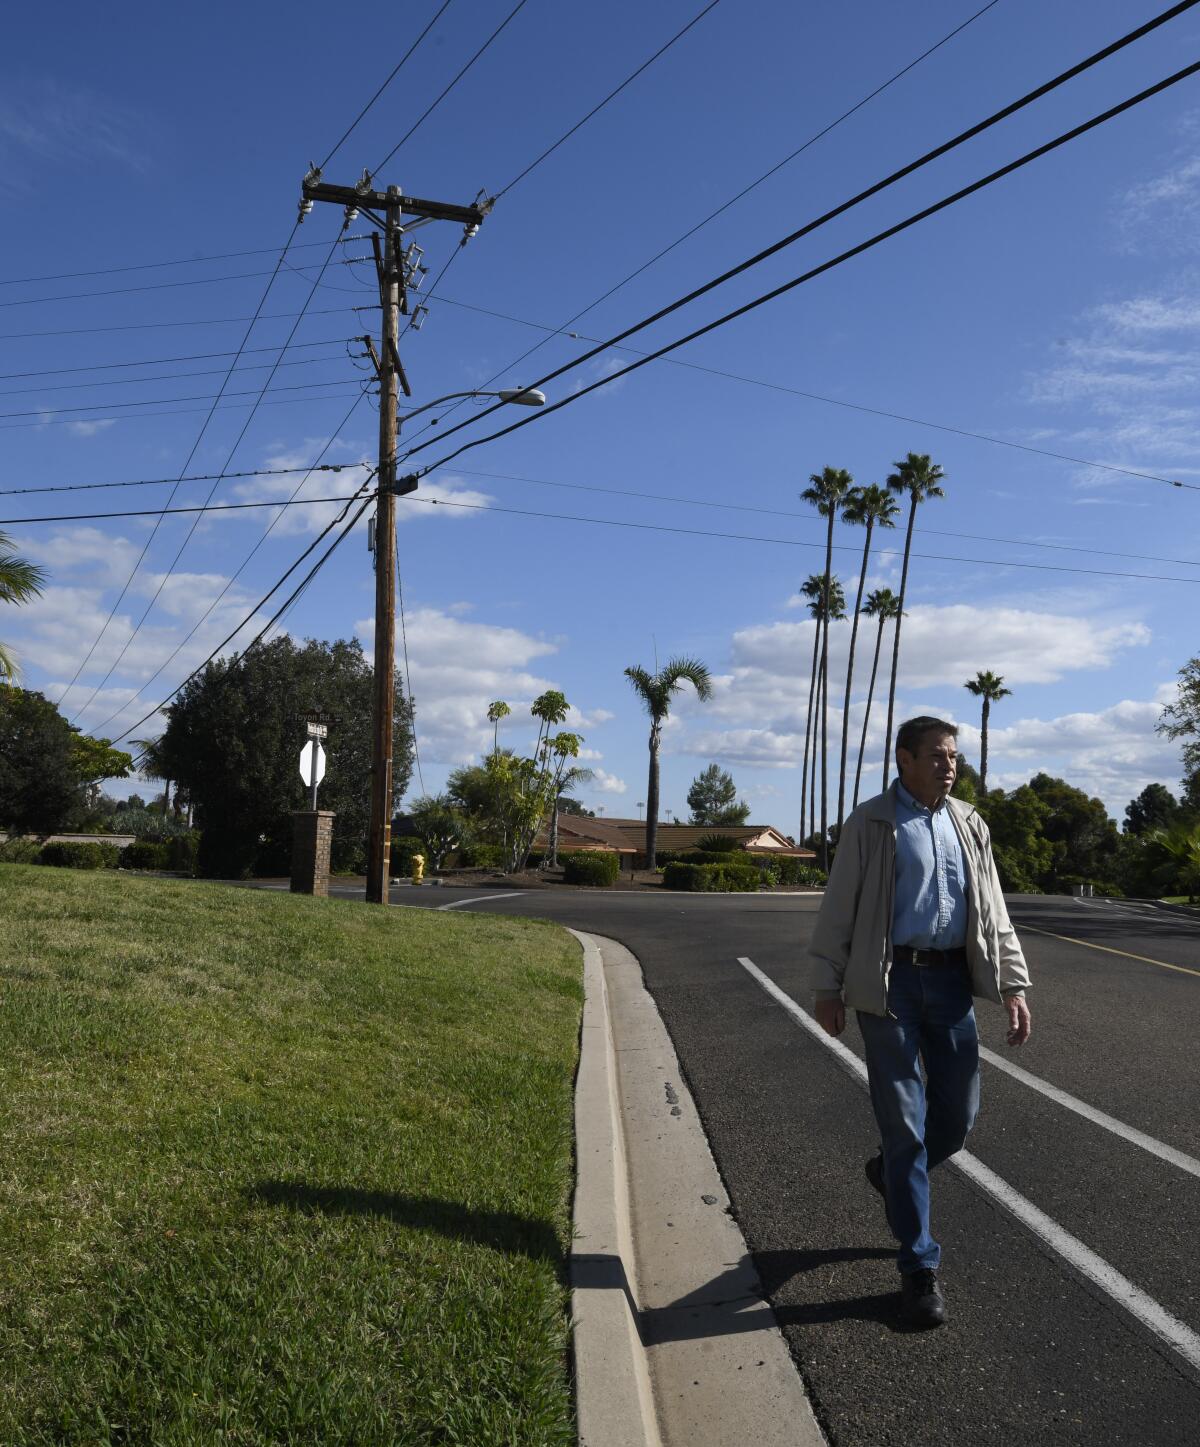 Jose Reynoso, president of the Alvarado Estates Community Assn., walks by a utility pole and power lines on Yerba Santa Drive inside Alvarado Estates in San Diego. City Atty. Mara Elliott says the neighborhood is ineligible to have its utilities undergrounded because it's a gated community.